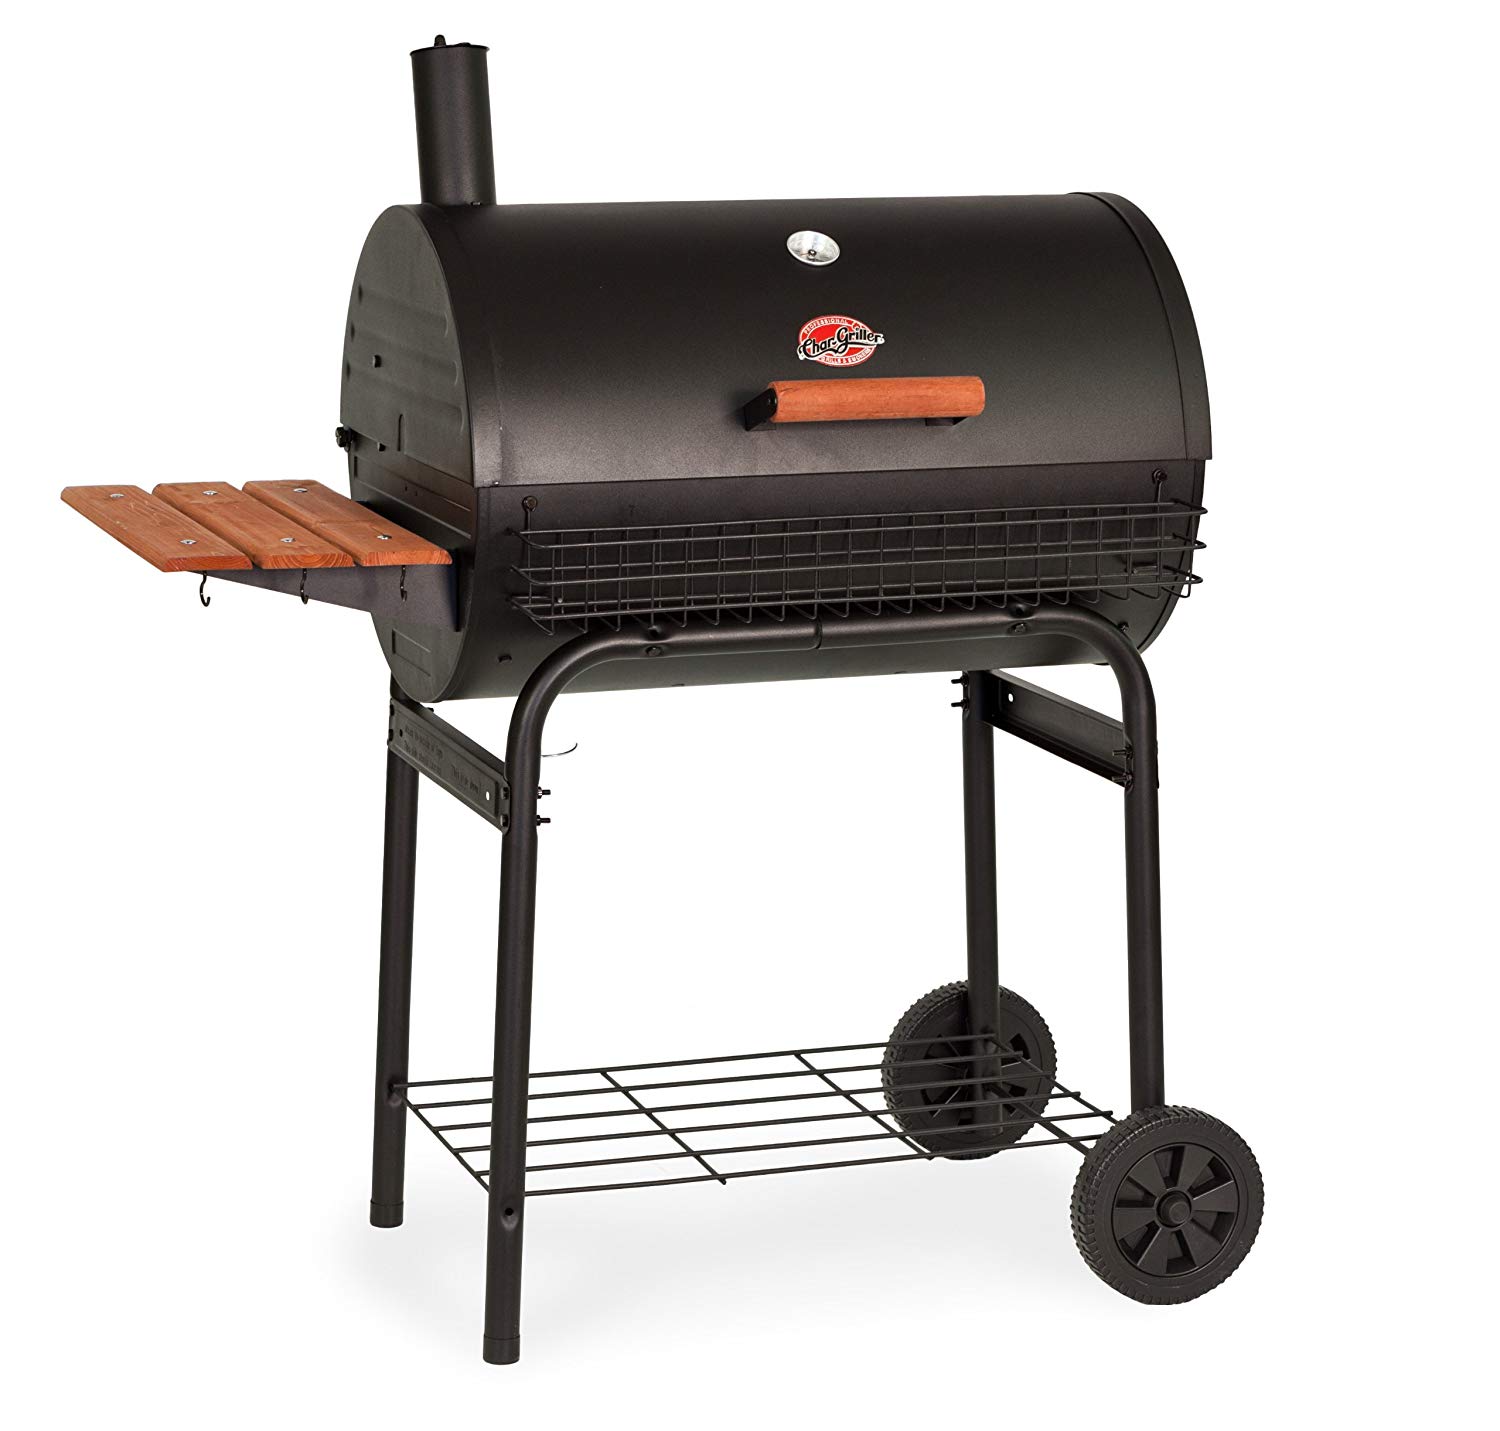  Char-Griller E2828 Pro Deluxe Charcoal Grill